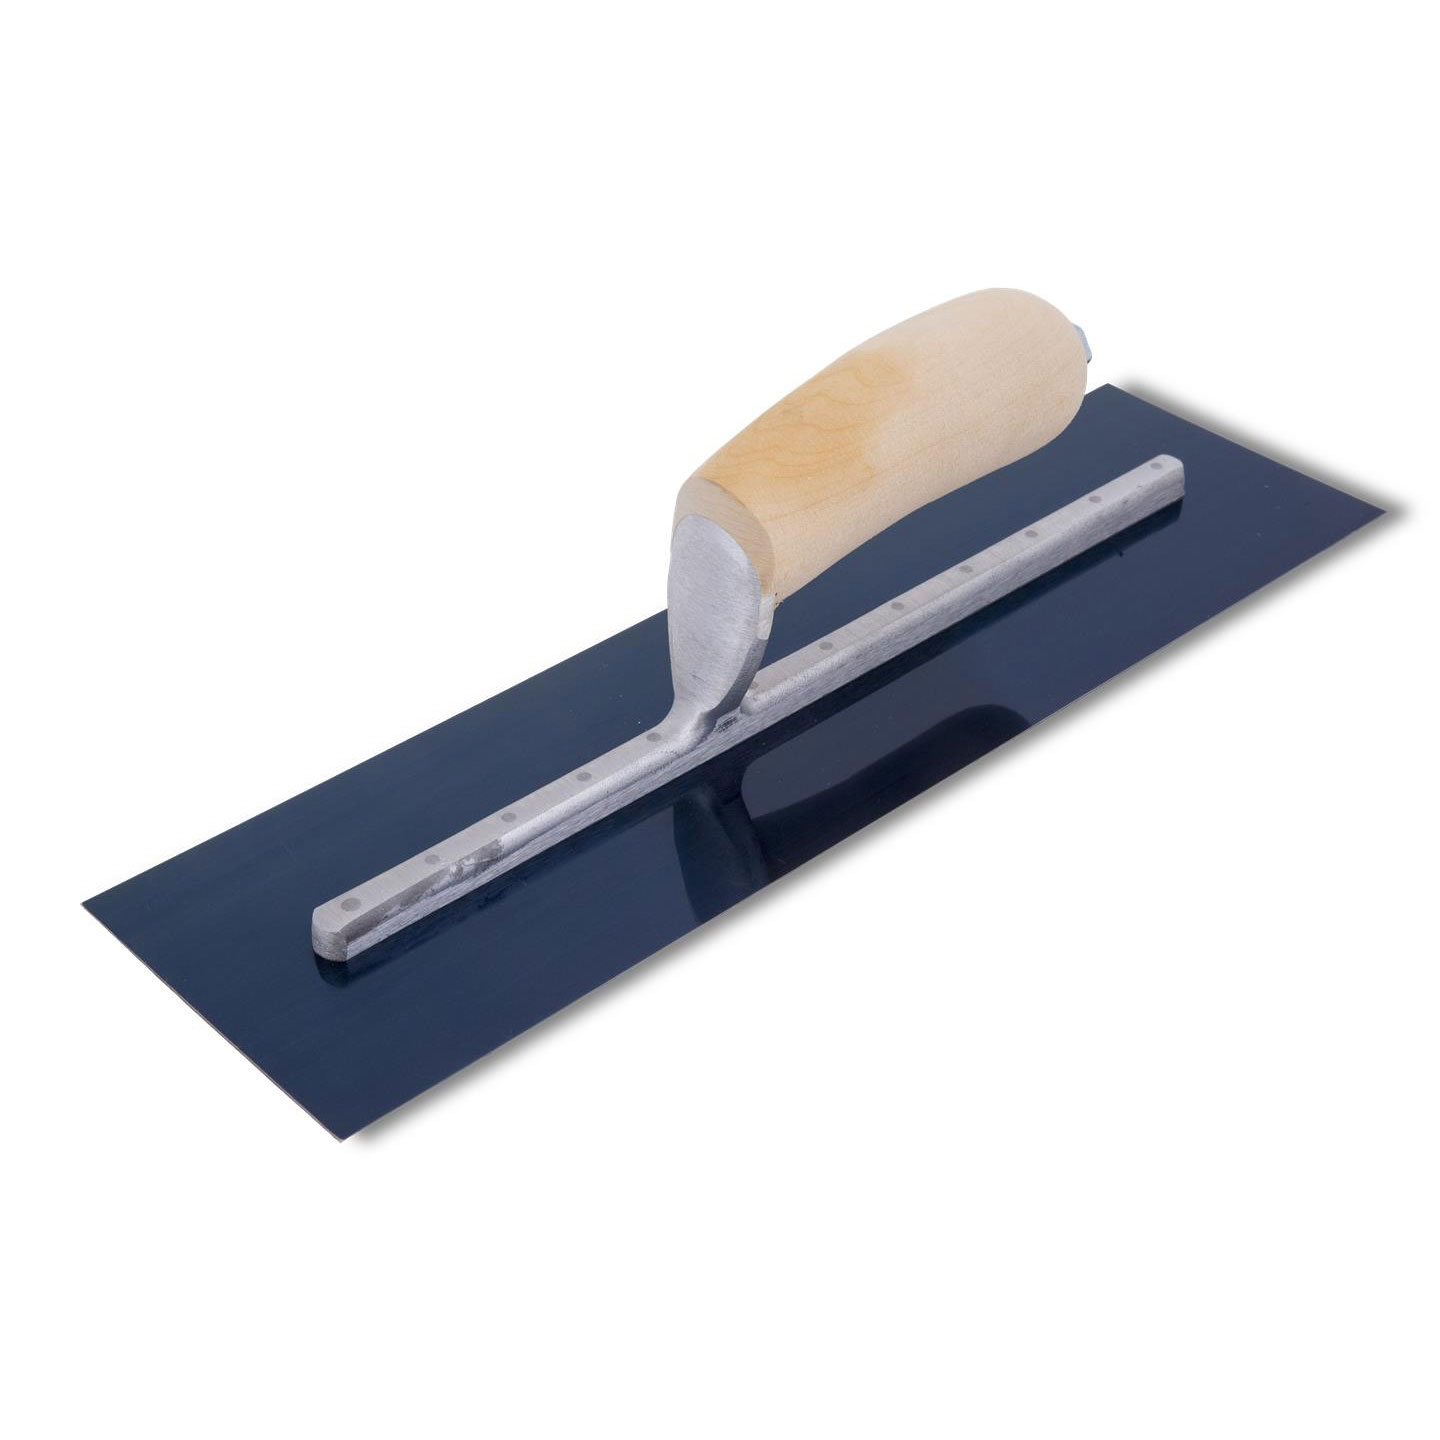 Marshalltown MXS57B 14in x 3in Blue Steel Finishing Trowel with Curved Wood Handle MXS57B